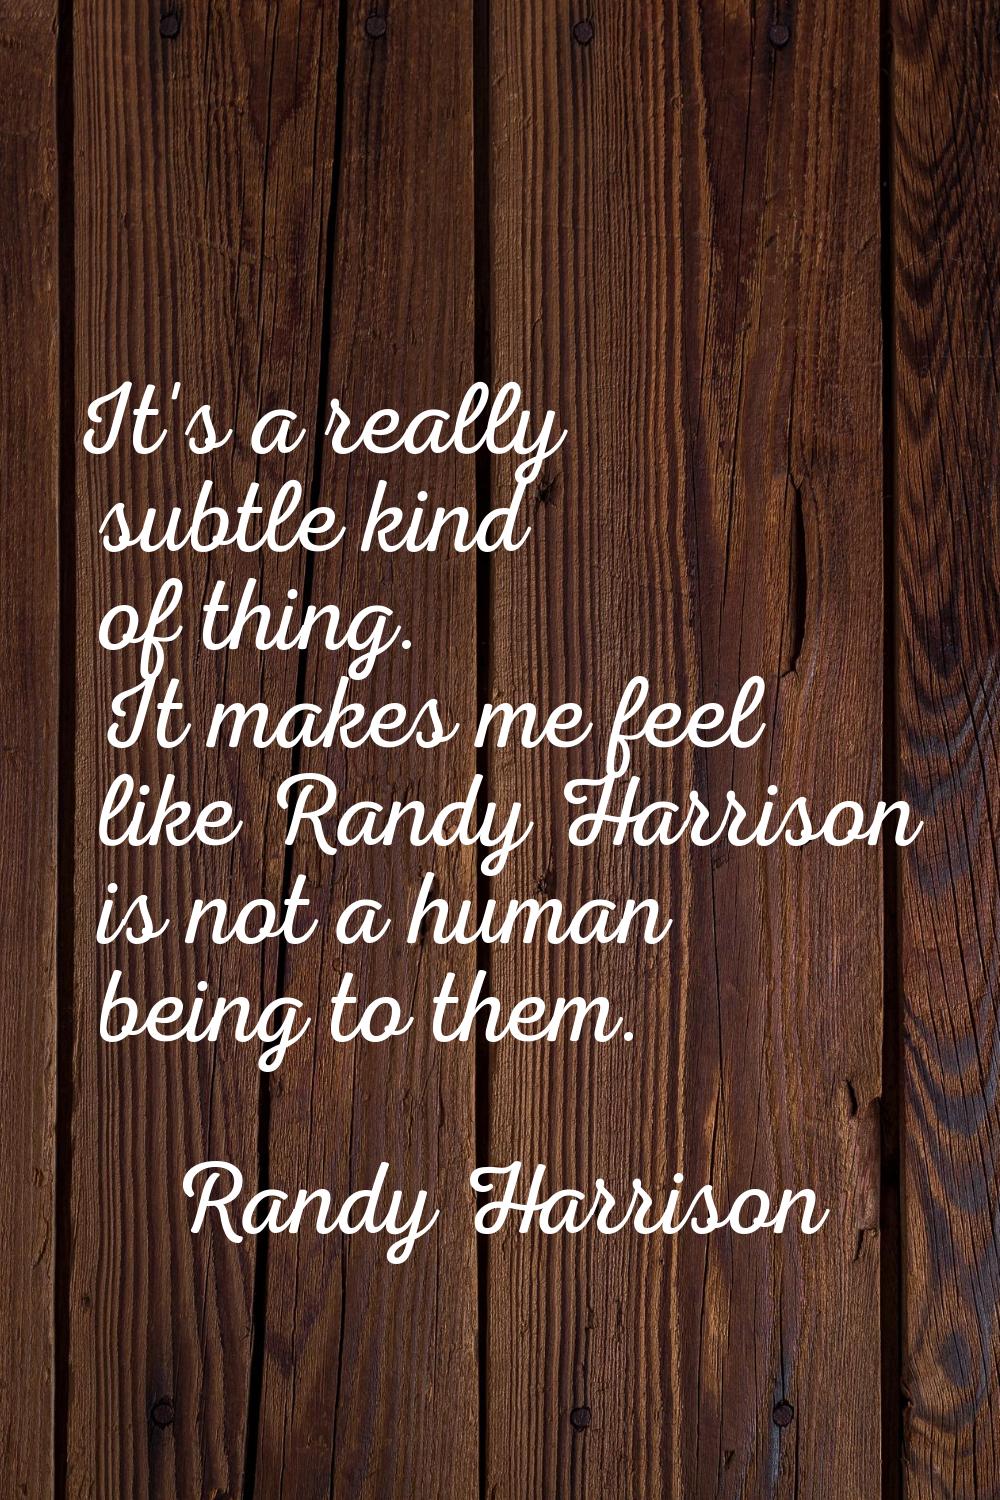 It's a really subtle kind of thing. It makes me feel like Randy Harrison is not a human being to th